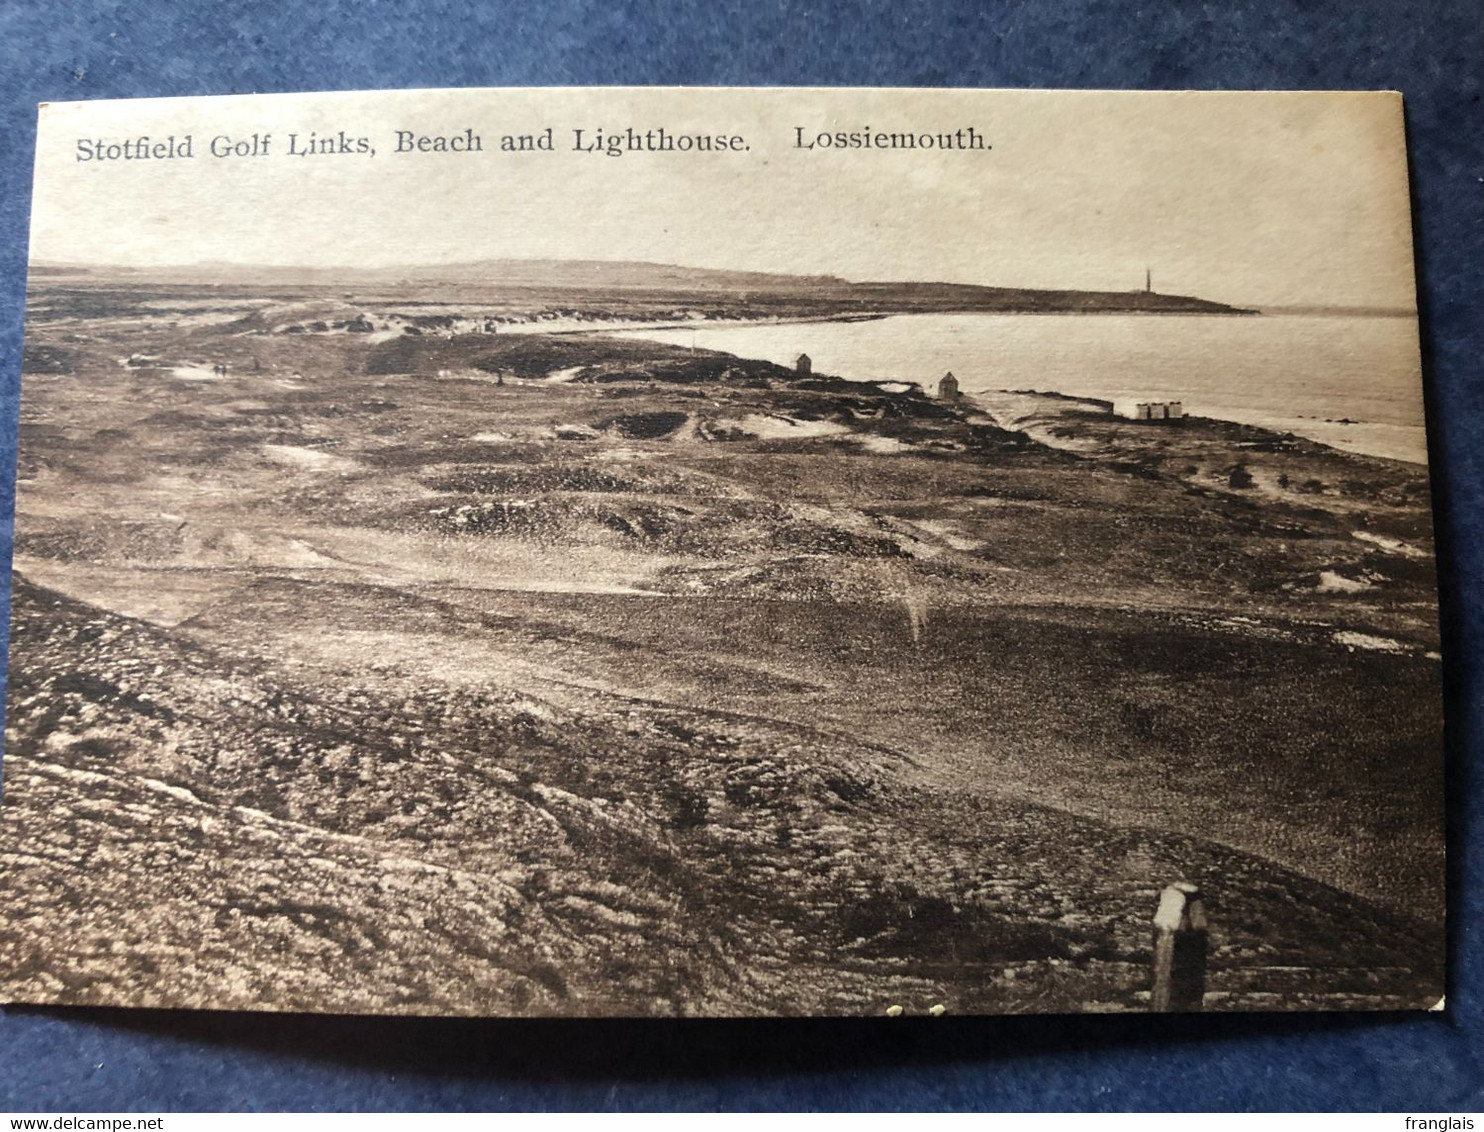 Stotfield Golf Links, Beach And Lighthouse, Lossiemouth, Unwritten Card - Moray